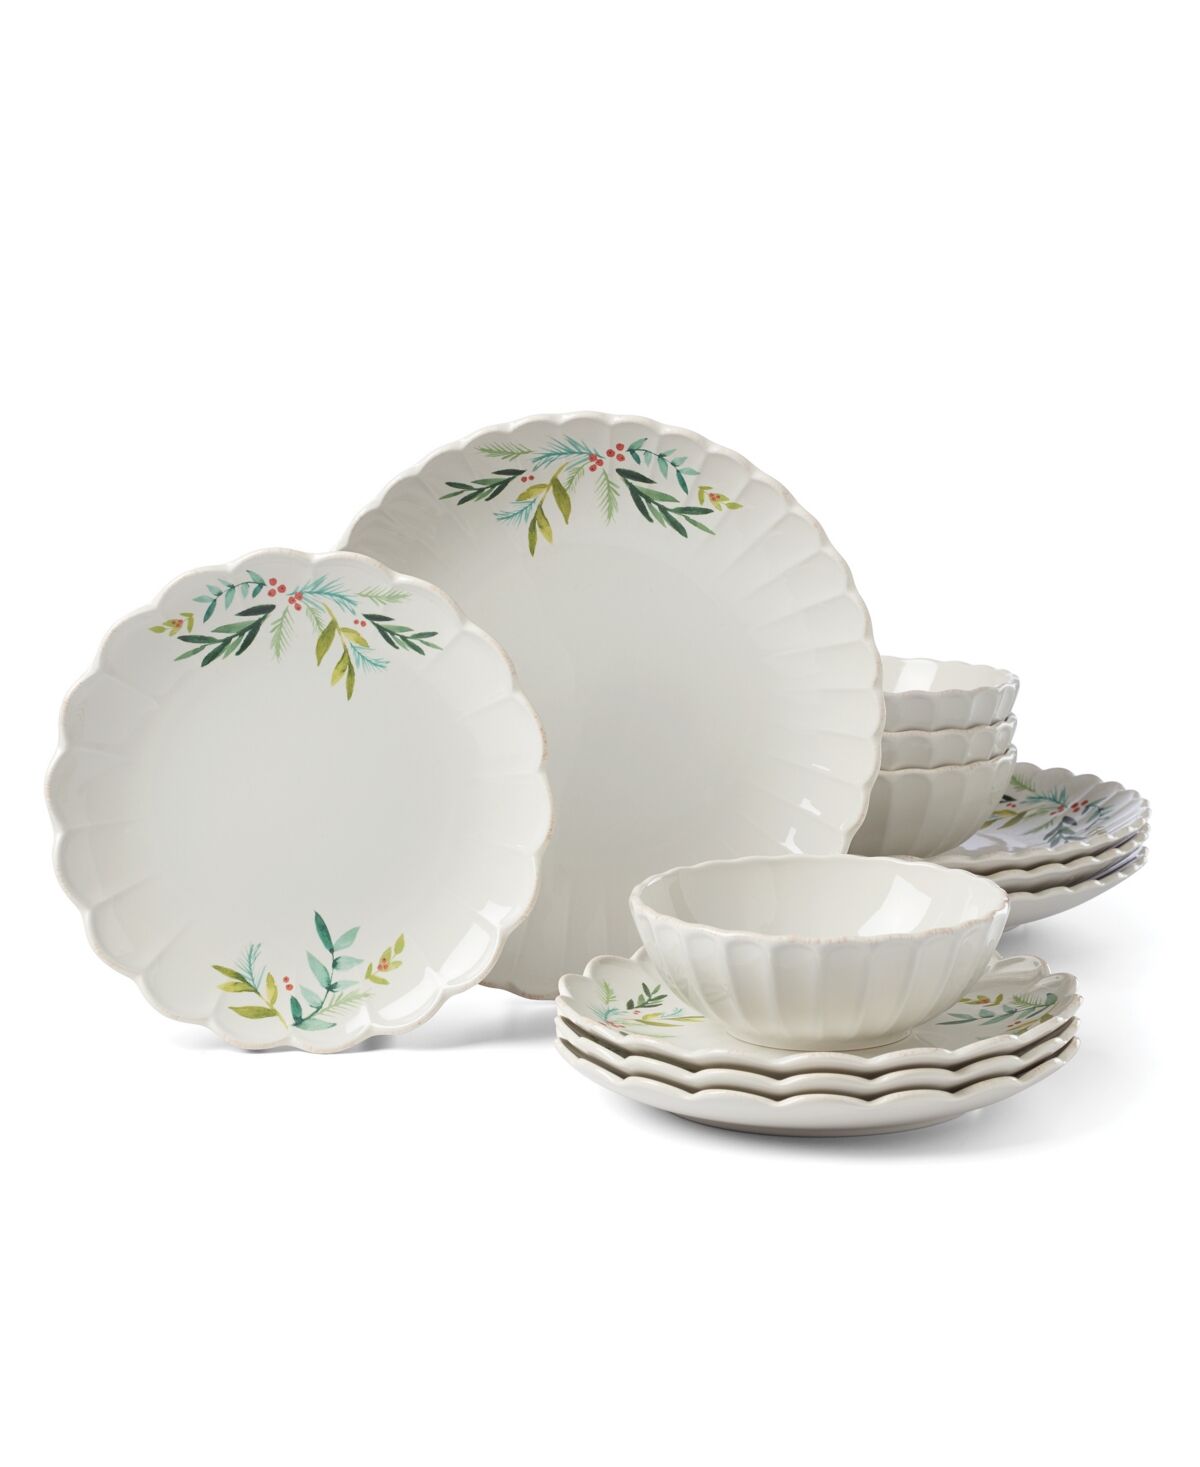 Lenox French Perle Berry Holly 12 Pc. Dinnerware Set, Service for 4 - White